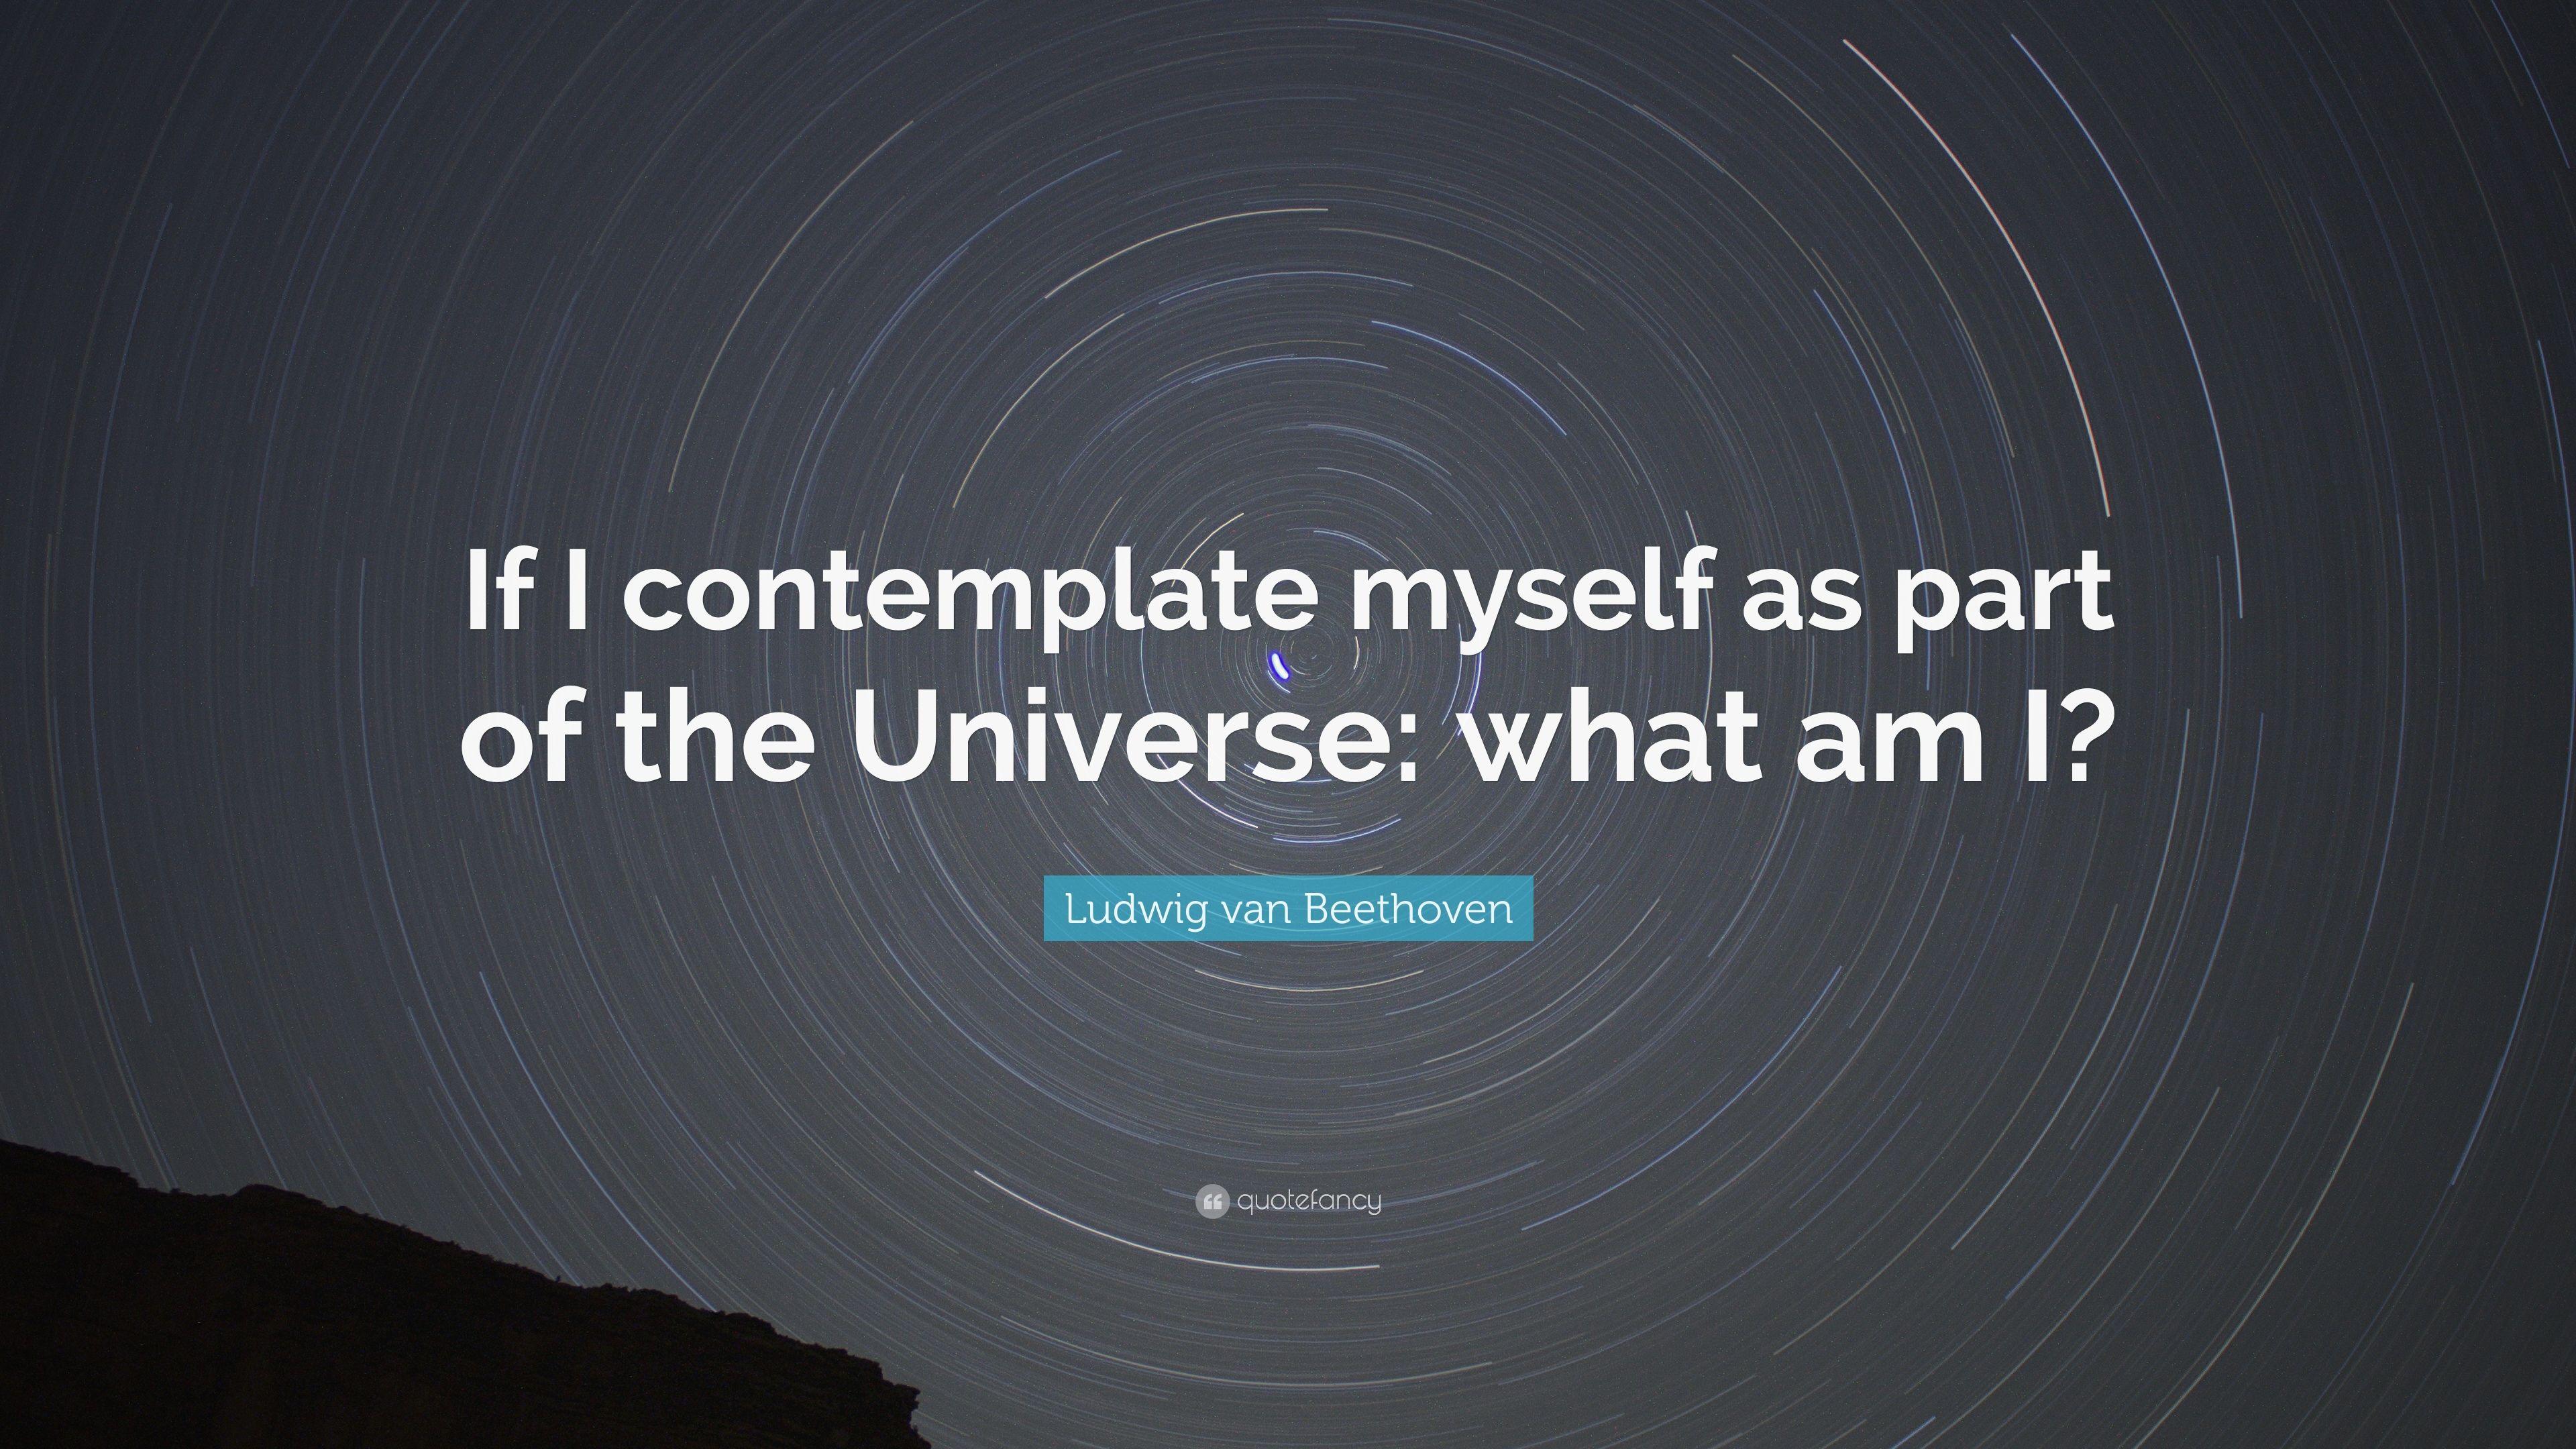 Ludwig van Beethoven Quote: “If I con myself as part